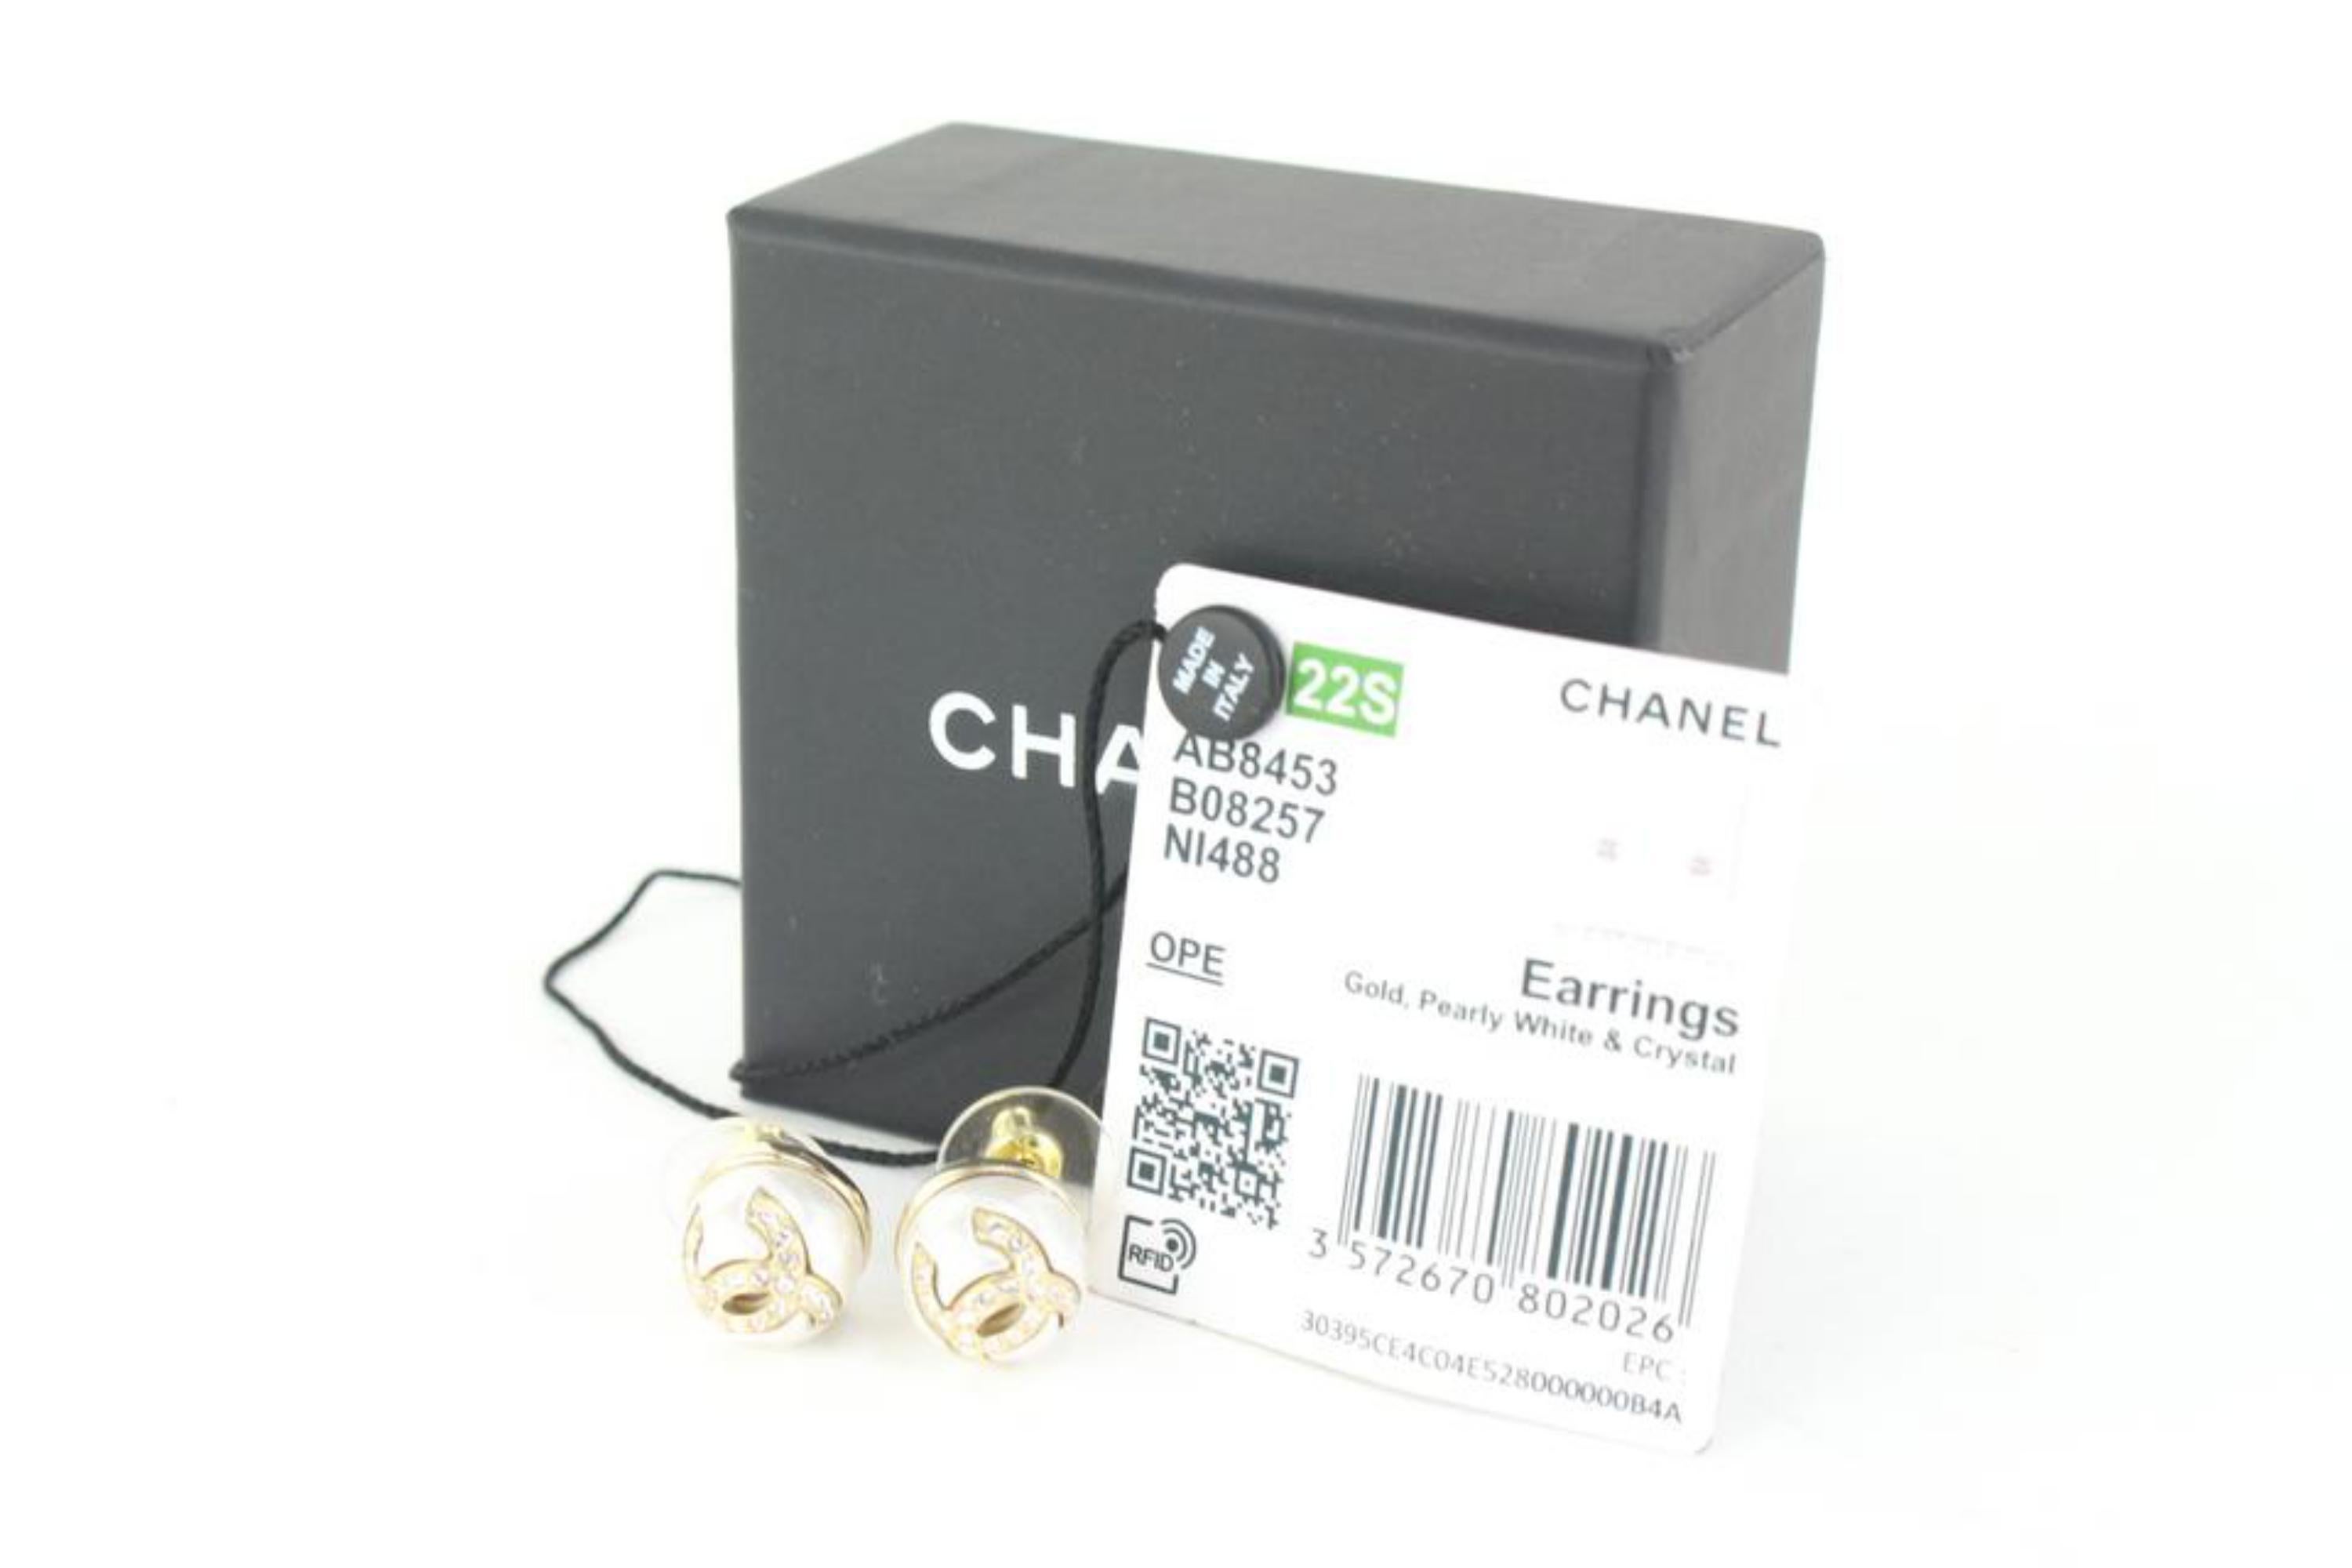 Chanel 22S Gold x Pearl CC Crystal Earrings 26cz510s For Sale 4